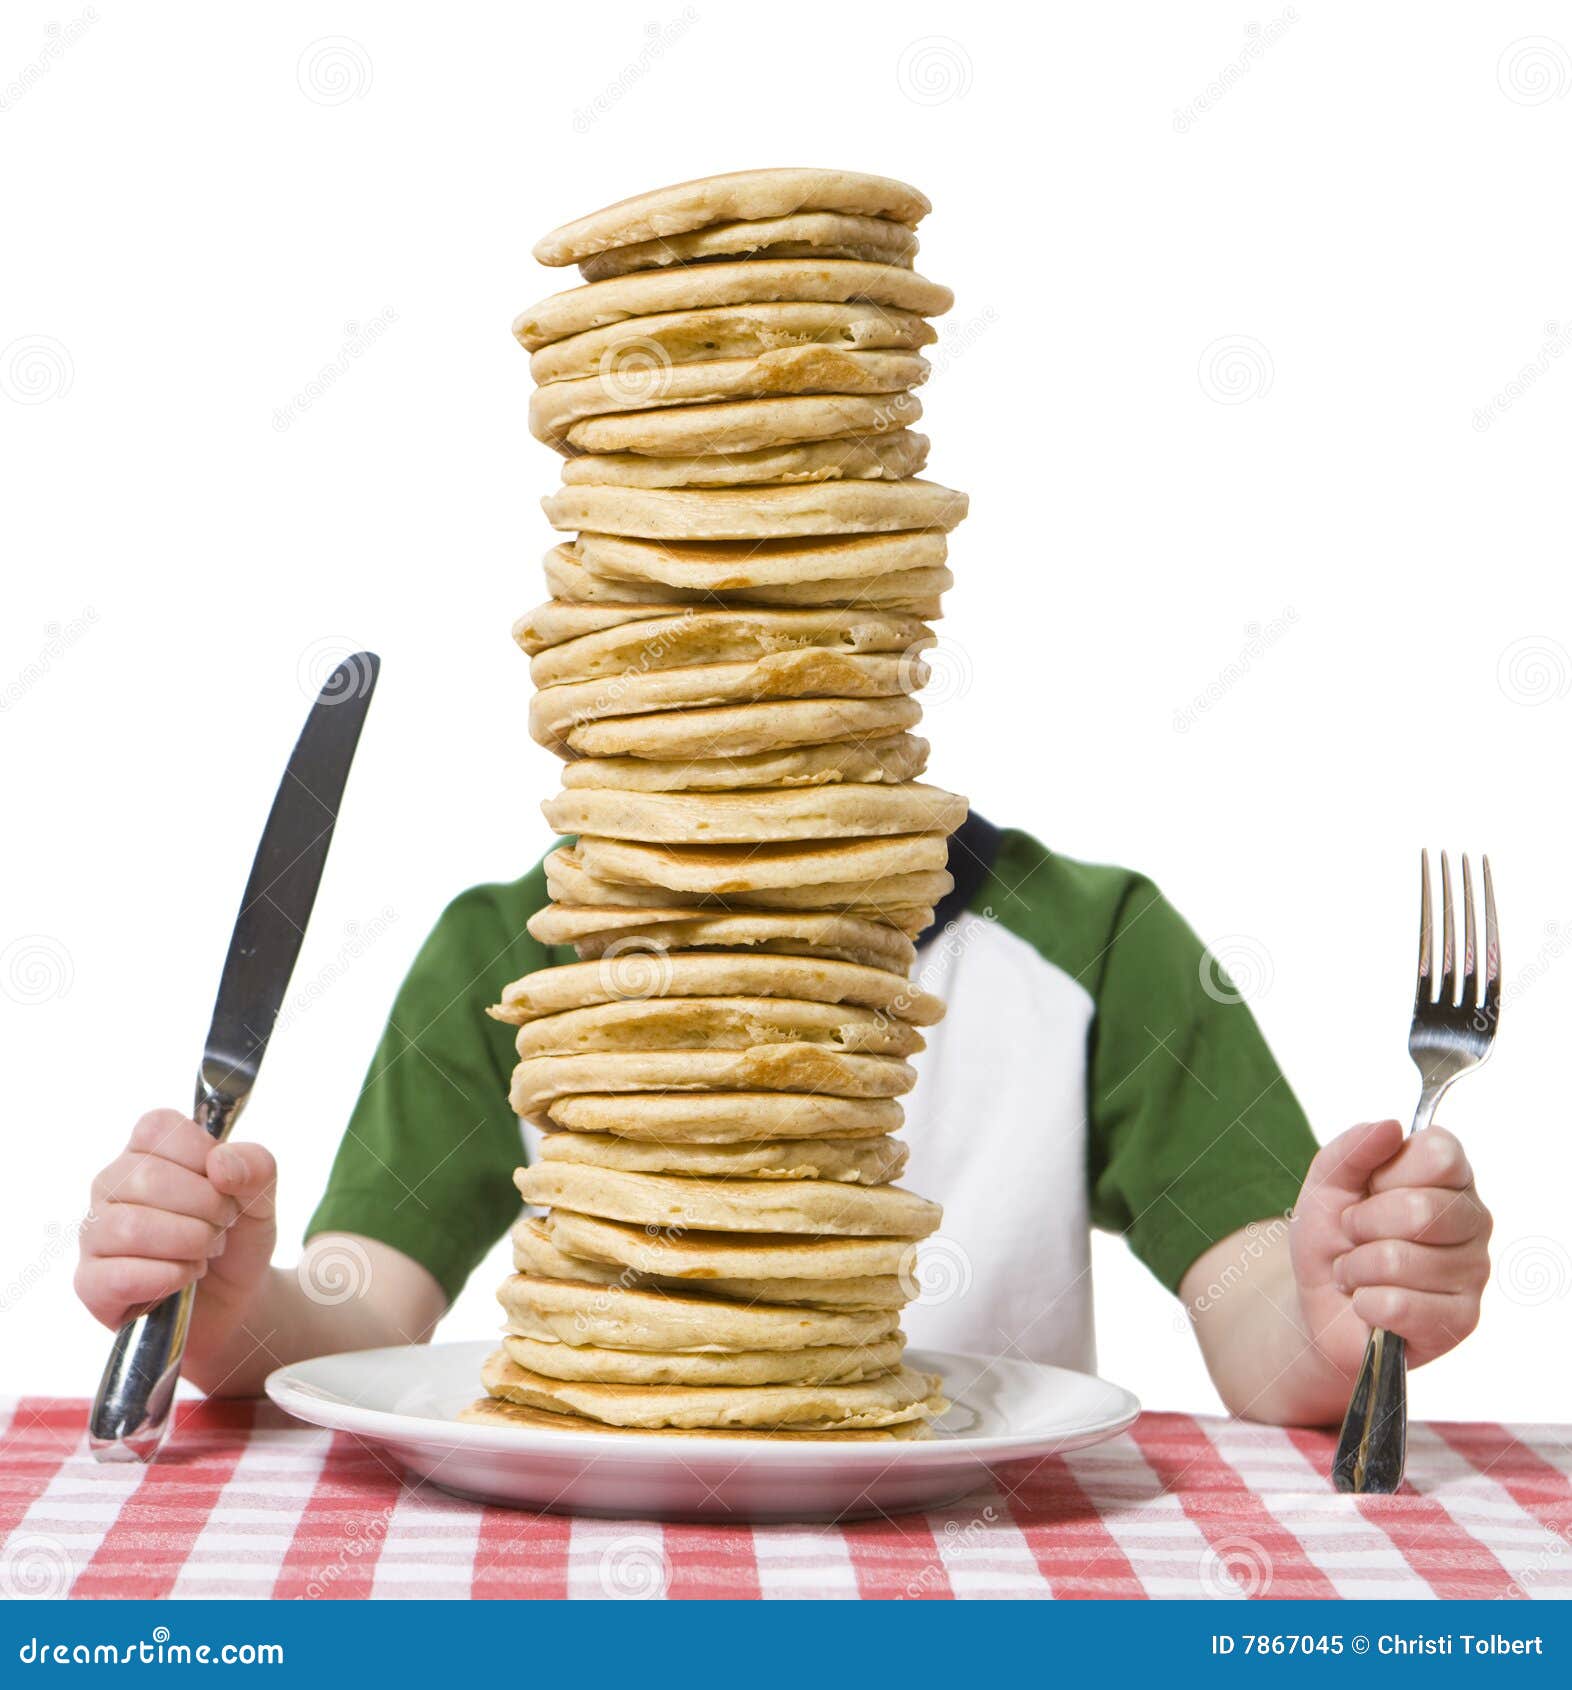 Image result for giant stack of pancakes